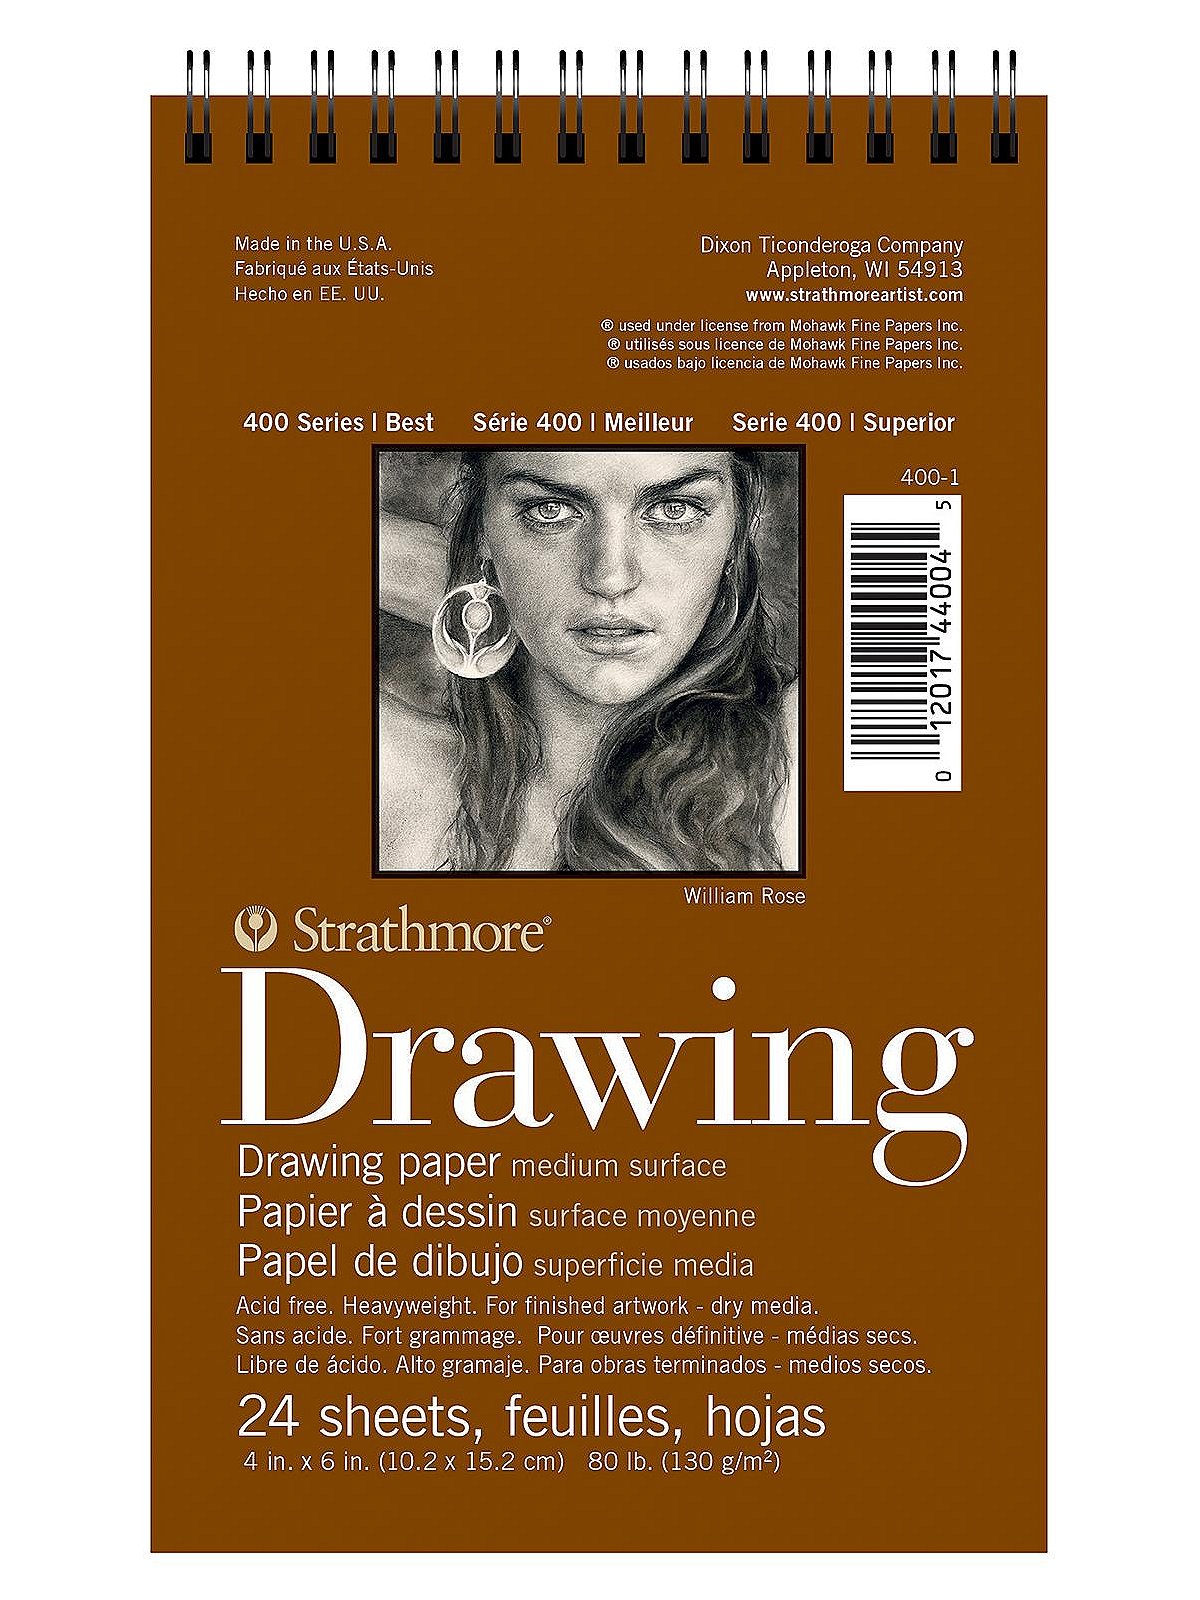 400 Series Drawing - Strathmore Artist Papers